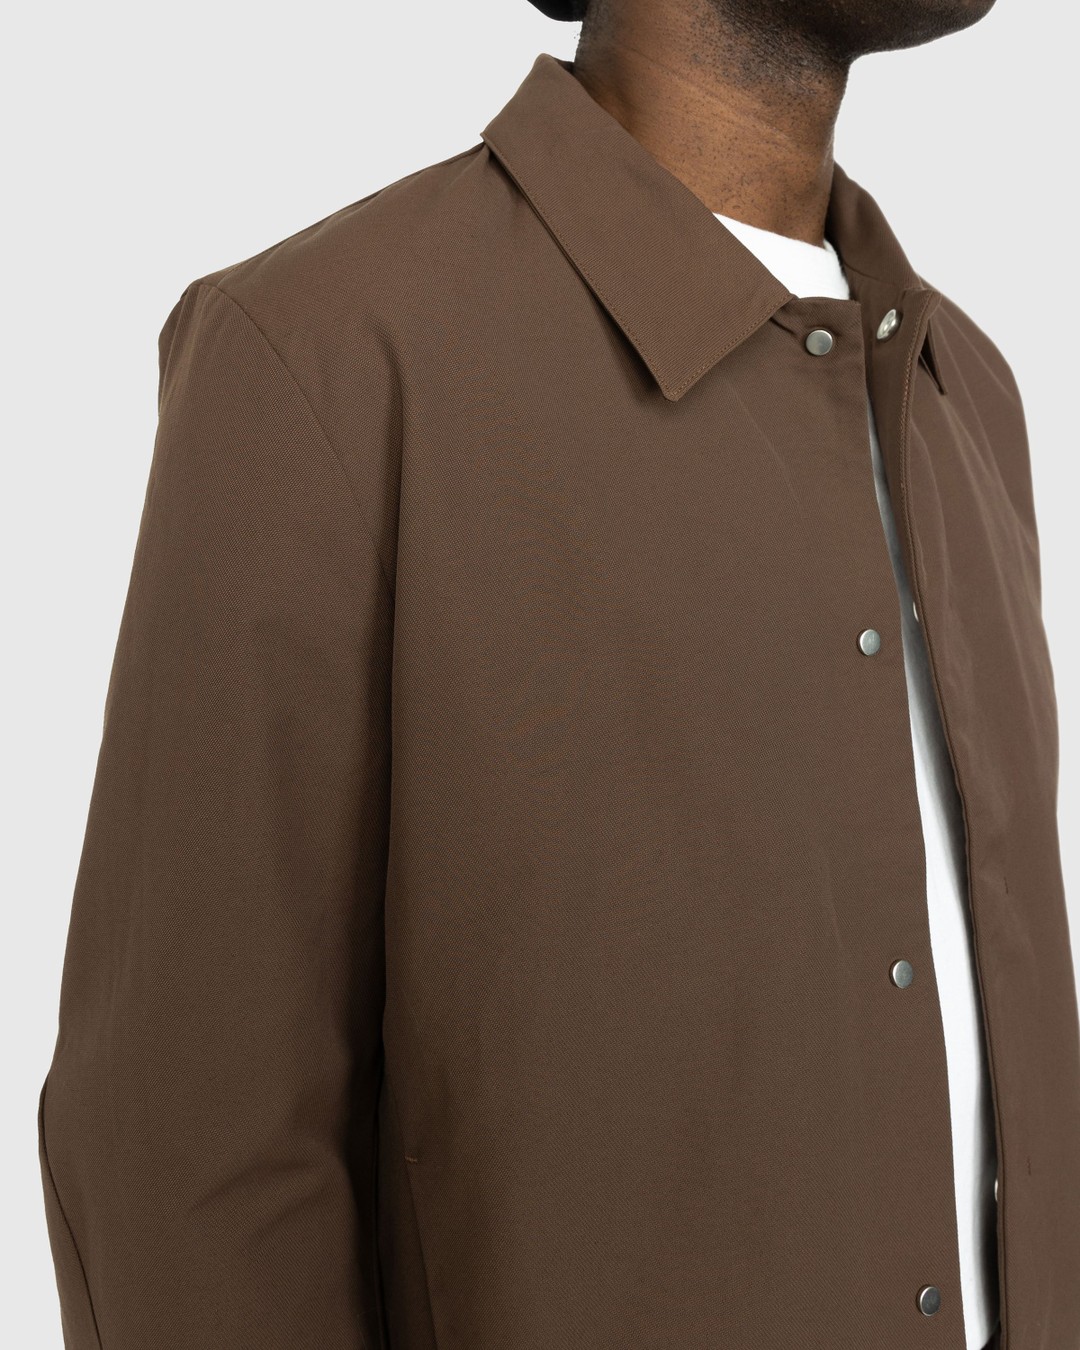 Post Archive Faction (PAF) – 5.0 Jacket Right Brown